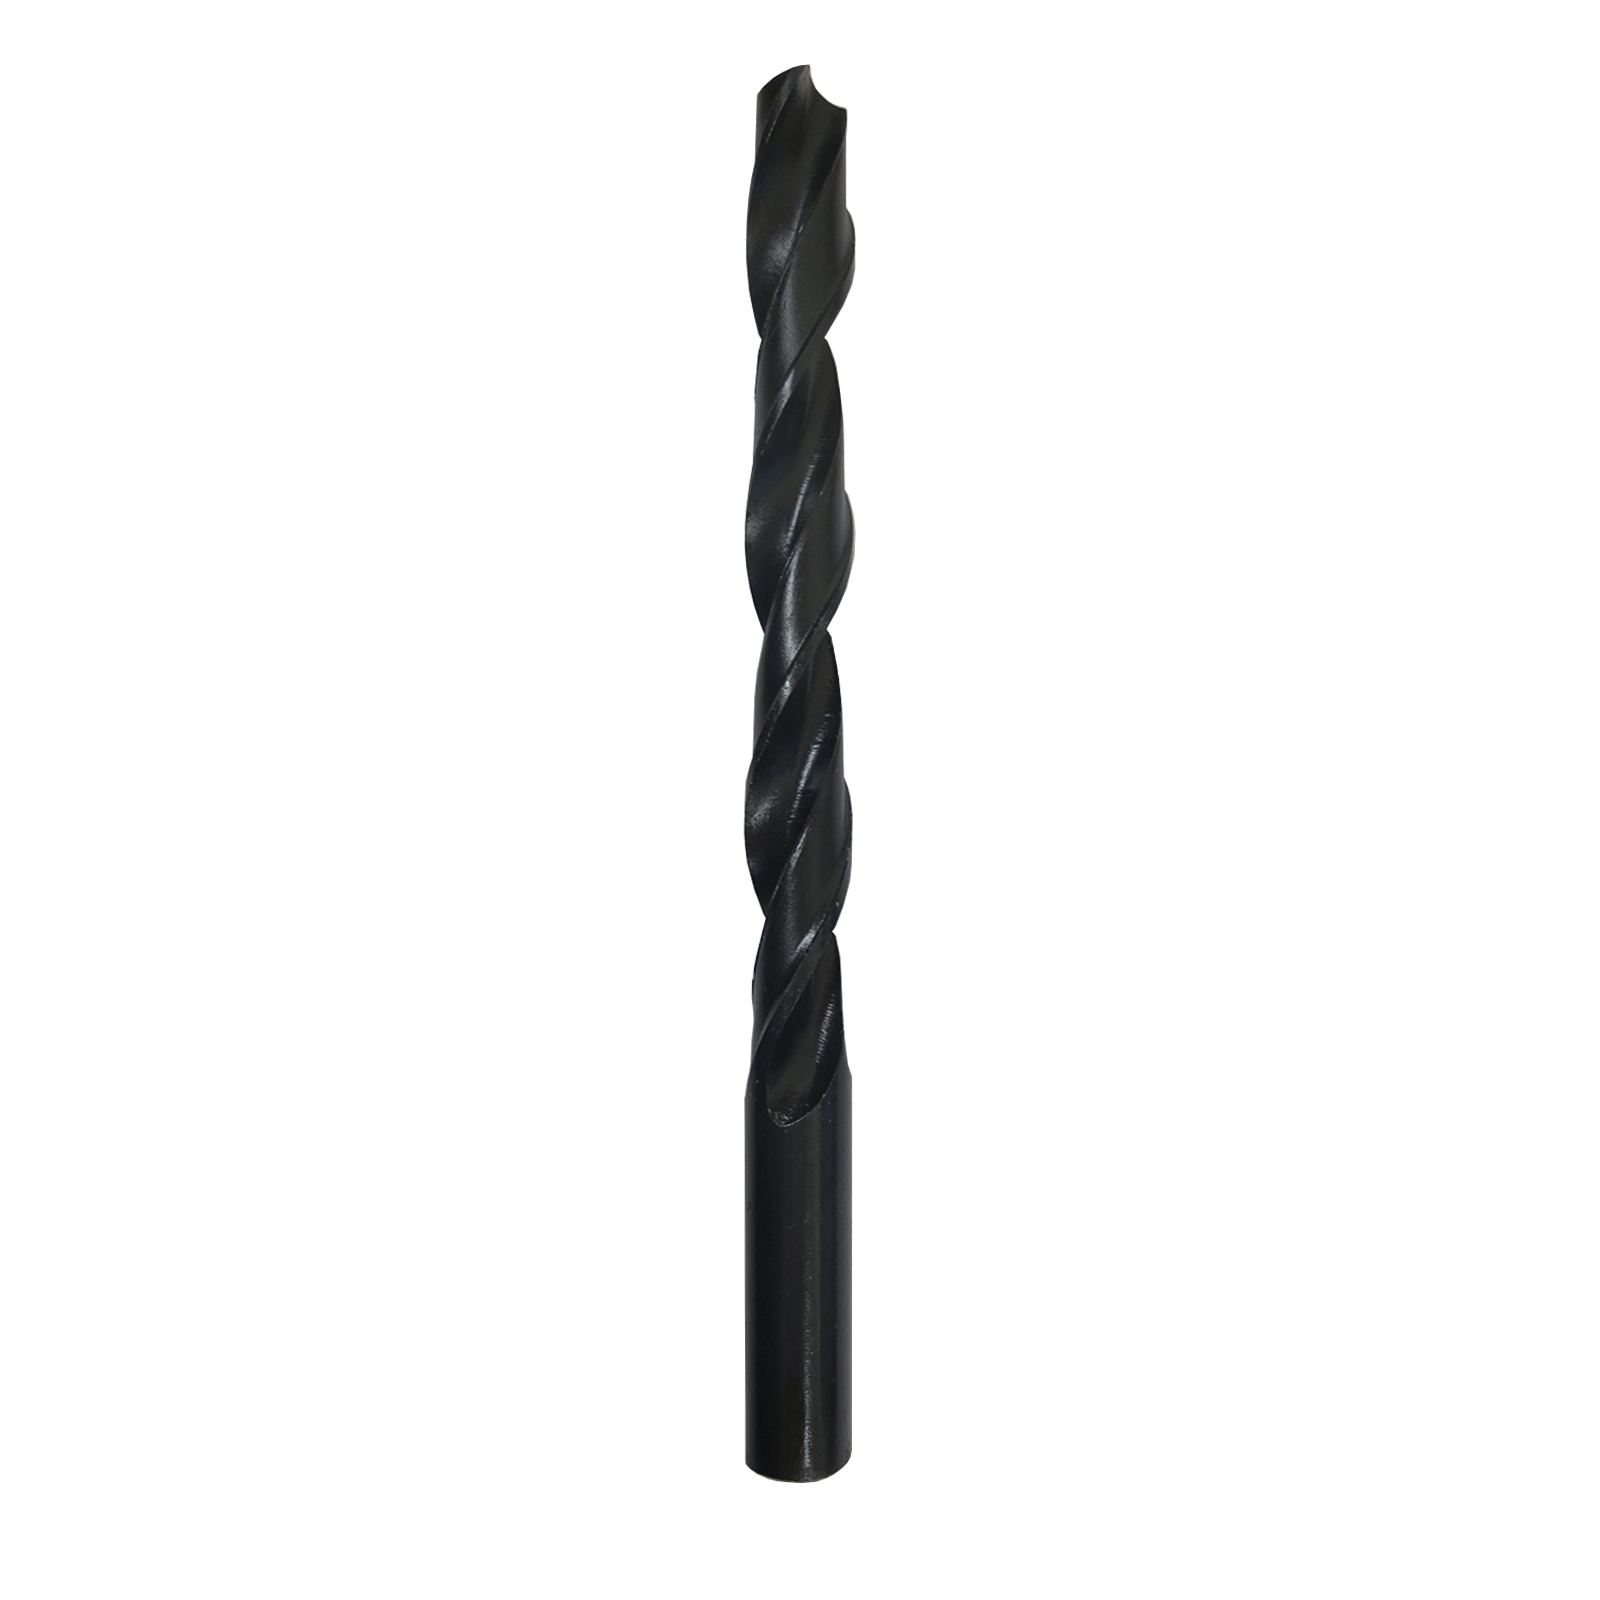 Gyros 45-42110 Premium (Made in US) Industrial Grade HSS Black Oxide Metric Drill Bit, 9.2 mm, Pack of 6